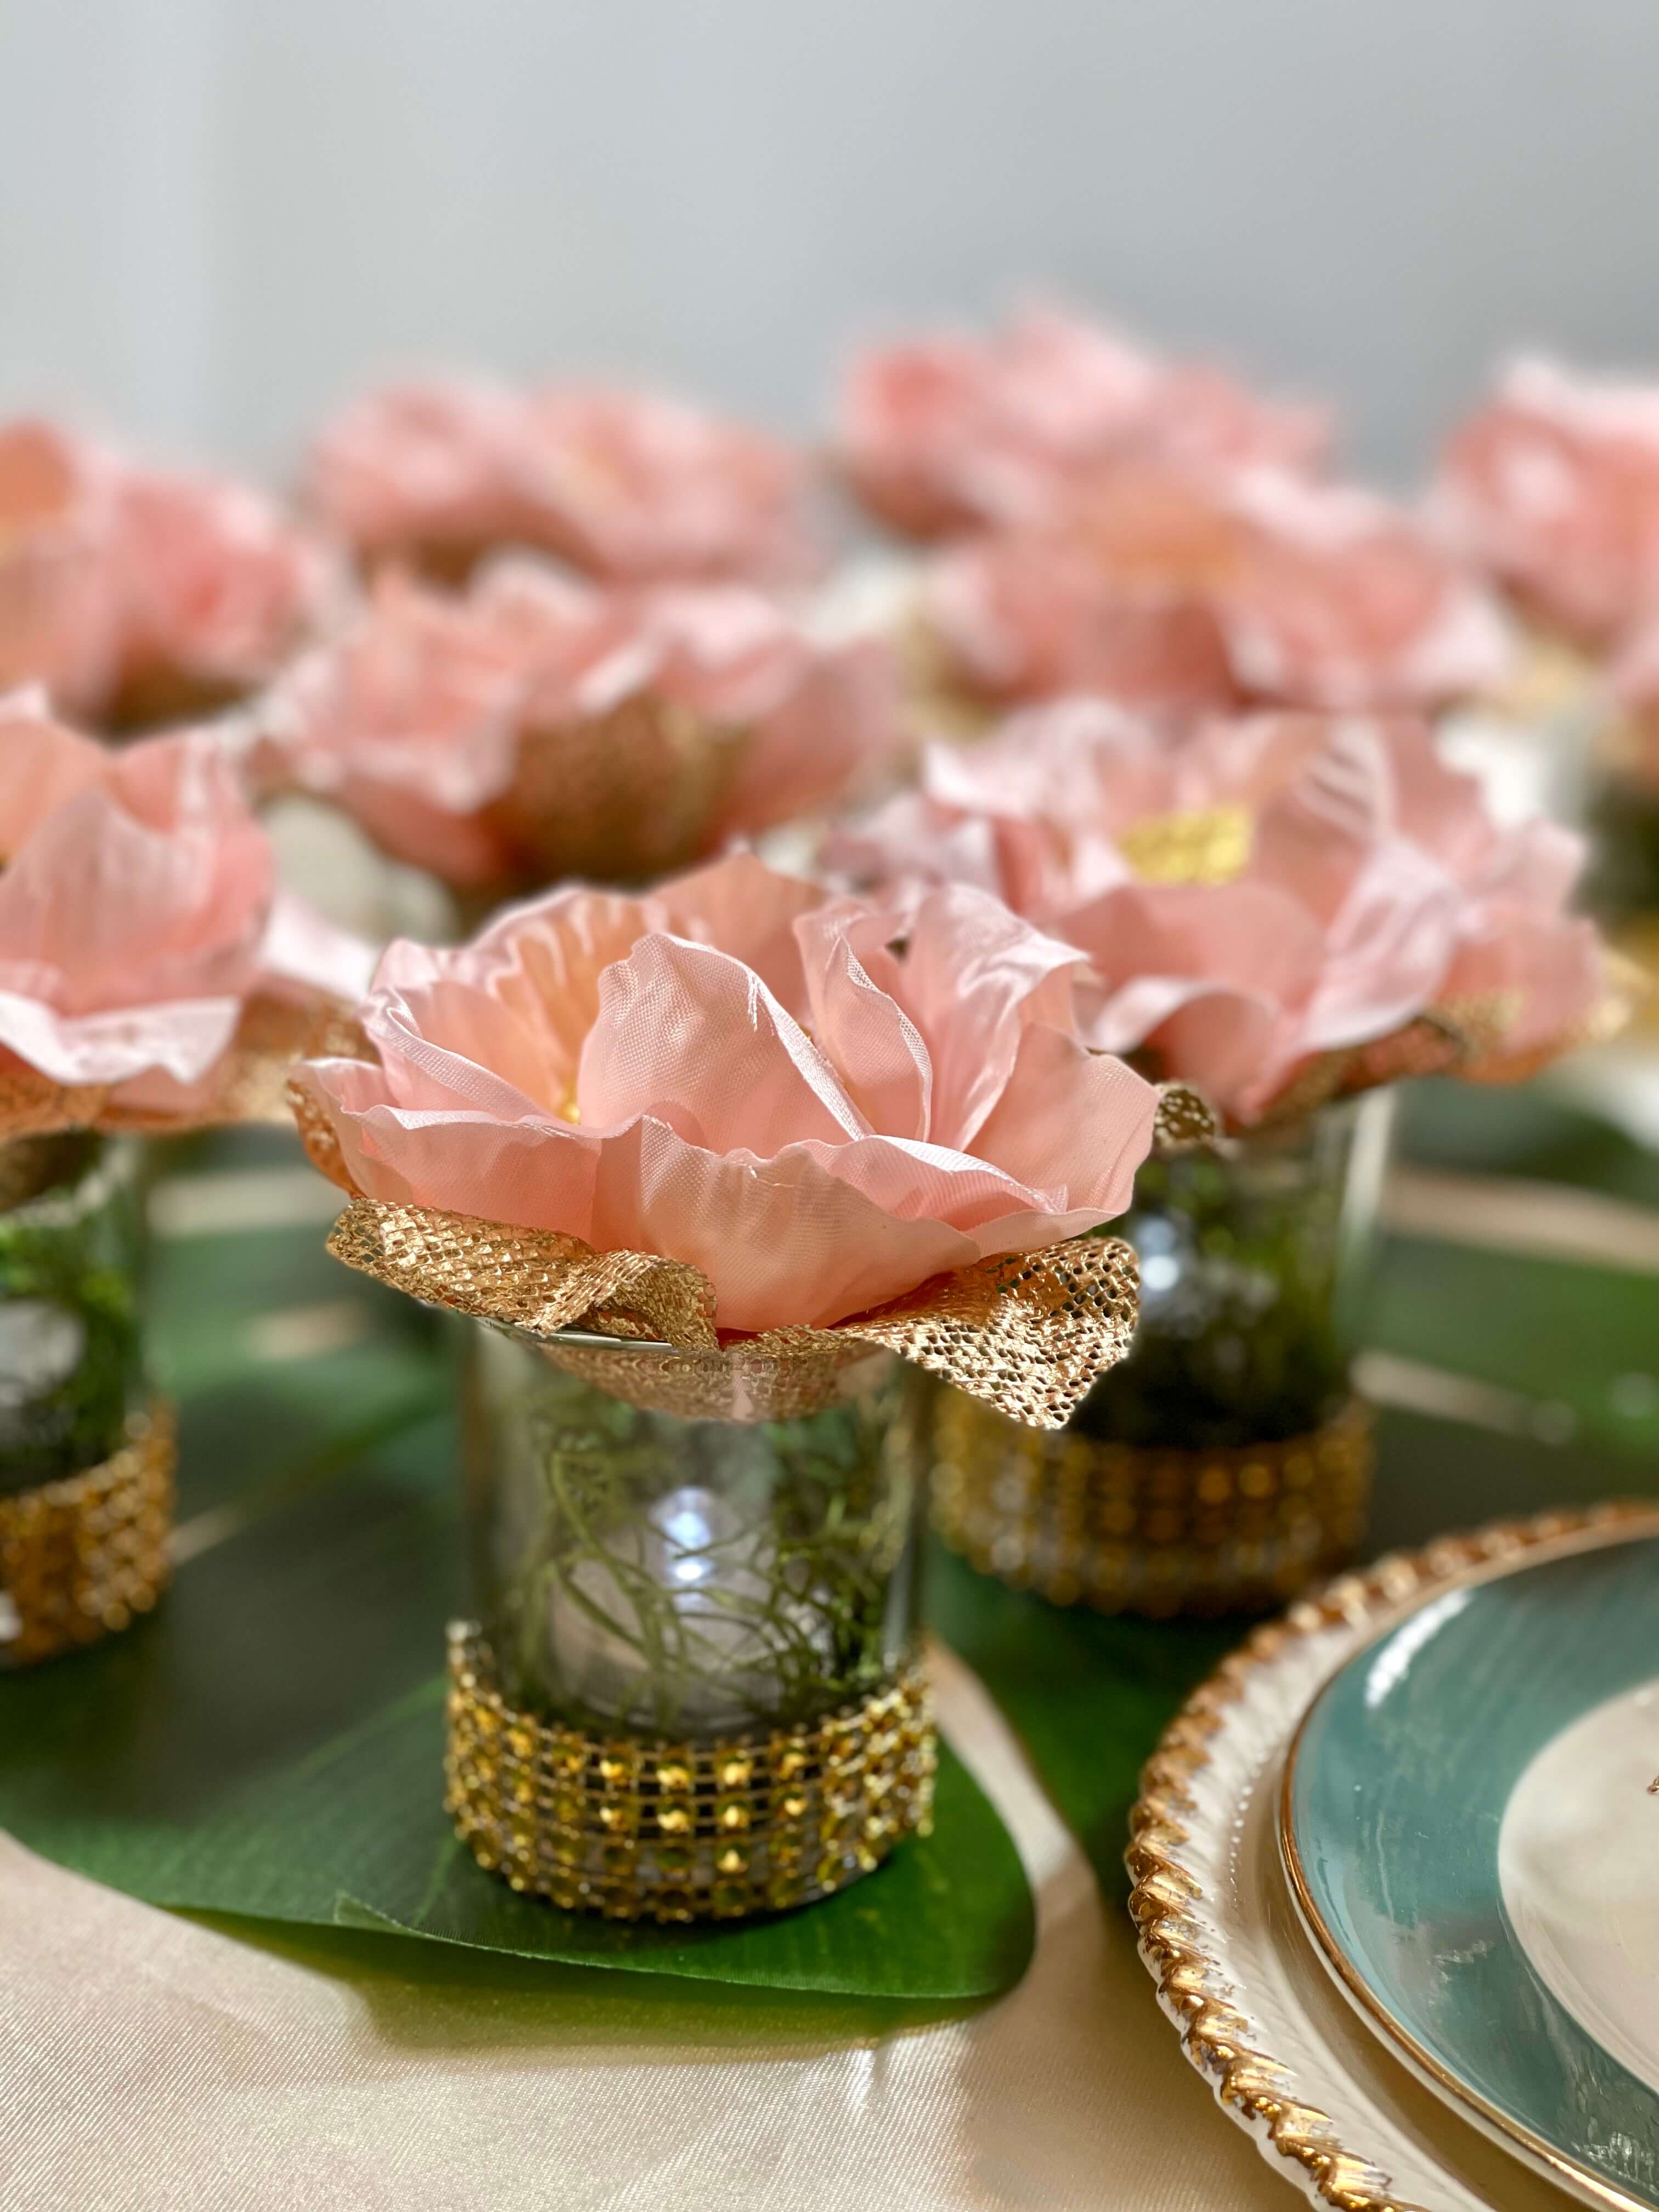 12 Silk Flowers Candle Party Favors For Guests. Affordable Wedding Decoration